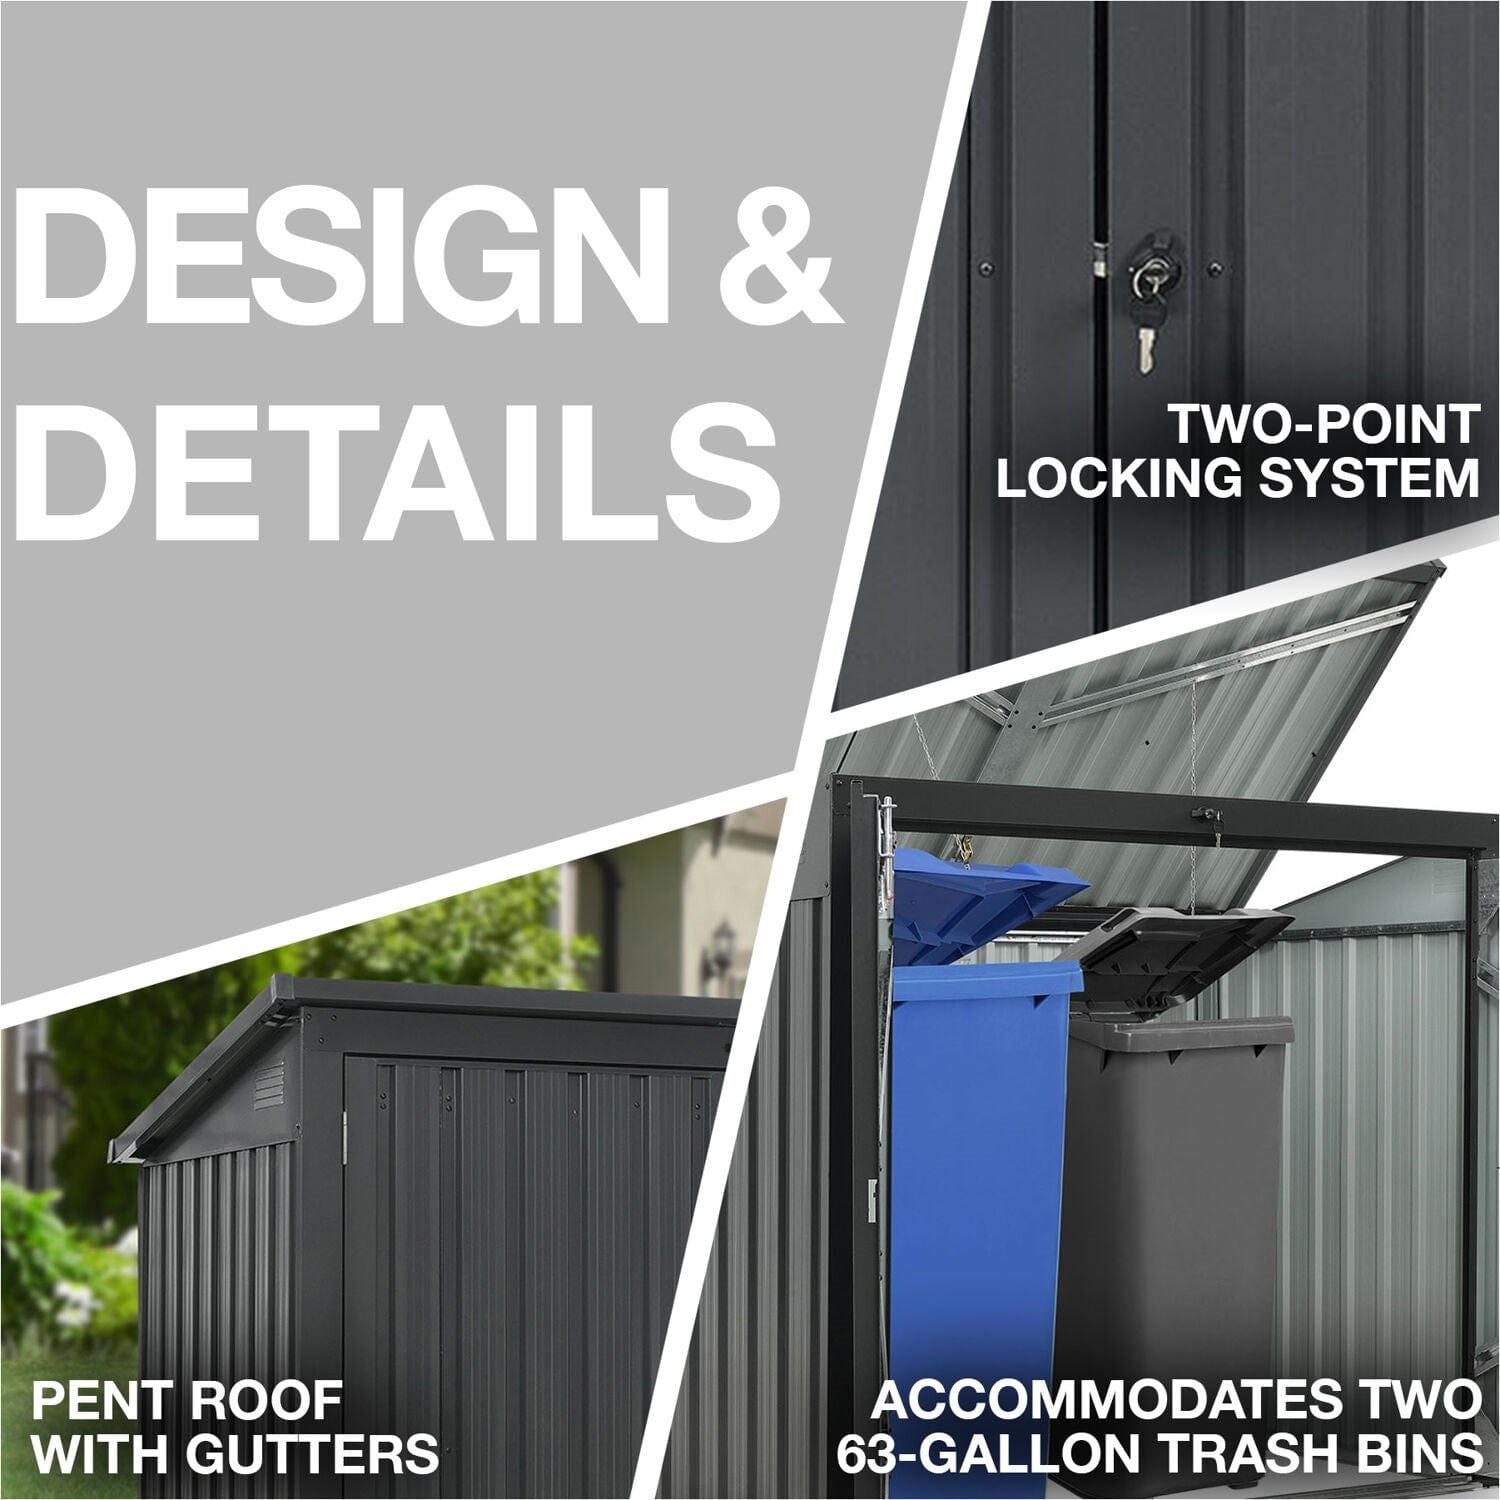 Hanover Hanover Galvanized Steel Trash and Recyclables Storage Shed with 2-Point Locking System, Dark Gray